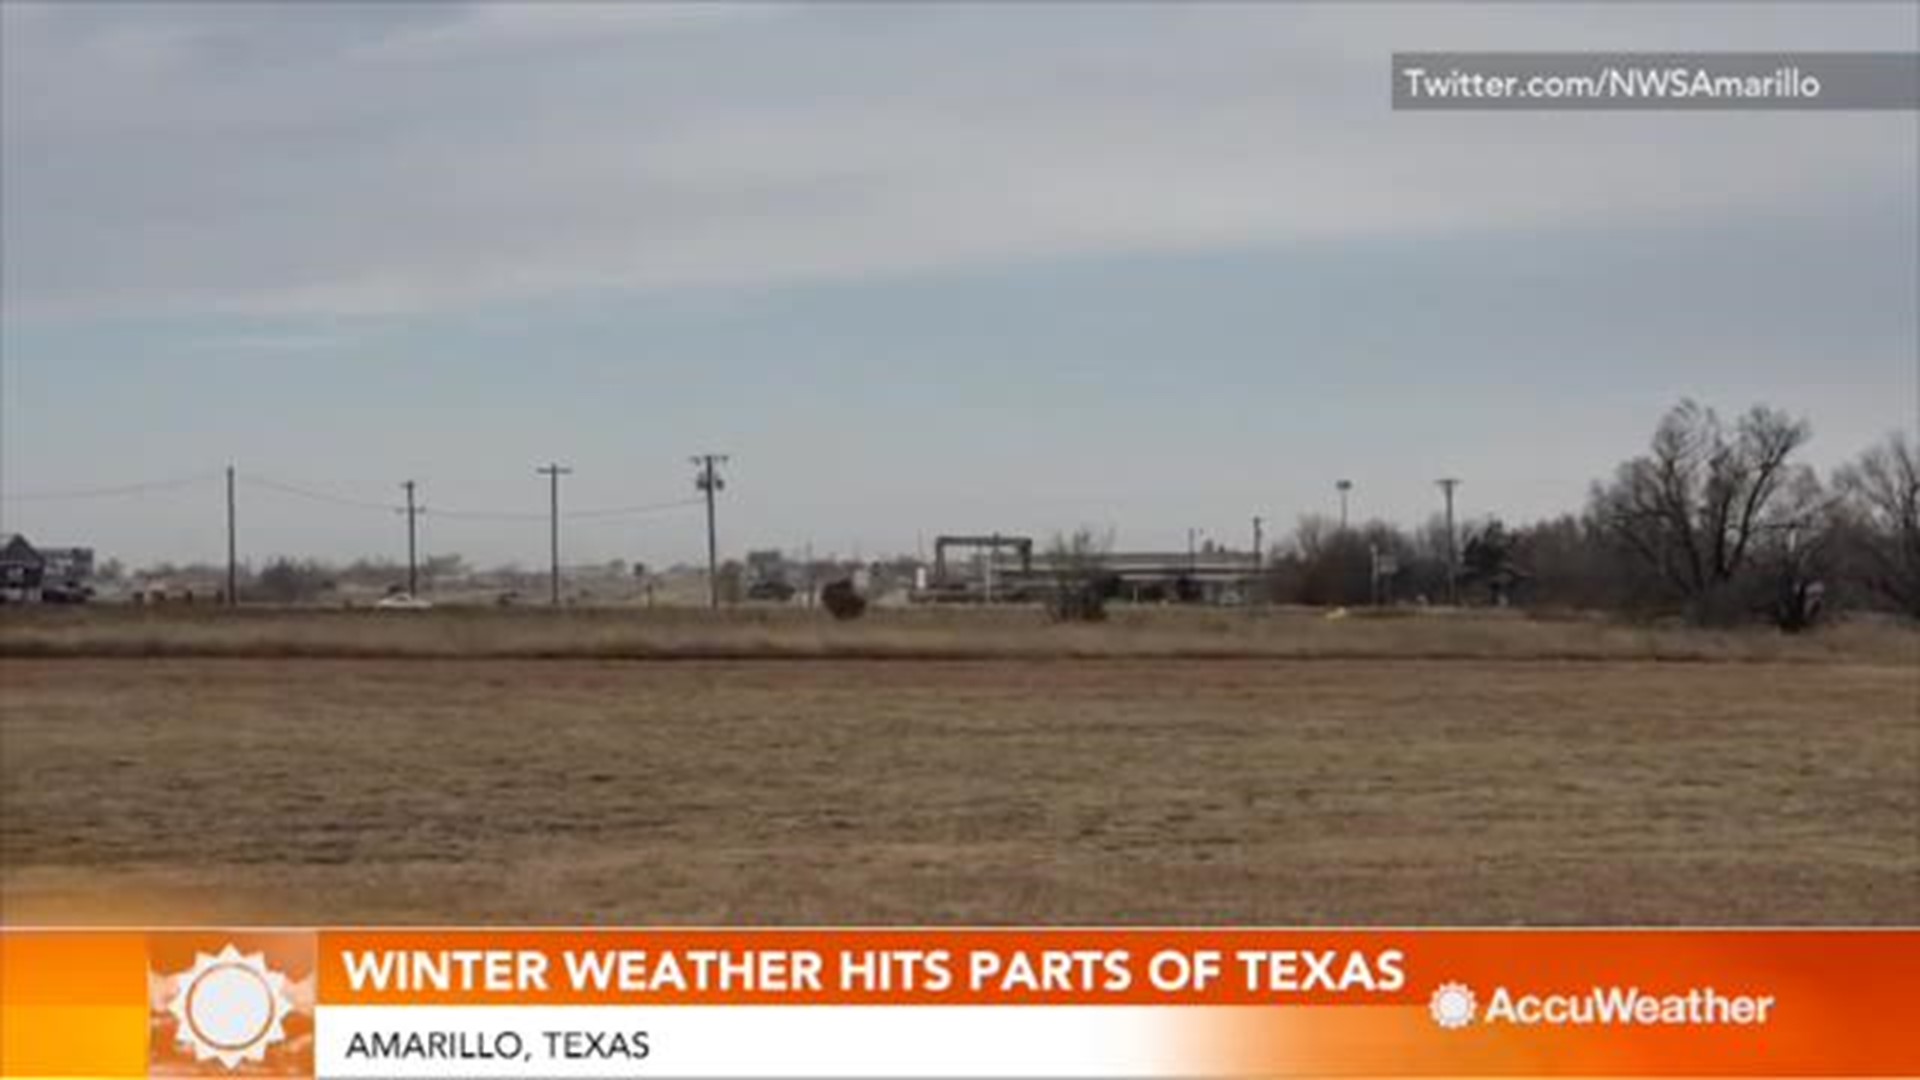 Texans dealing with a mixed bag of winter weather as cold temperatures and gusty wind hit parts of the state with as much as 7 inches of snow falling in some areas.